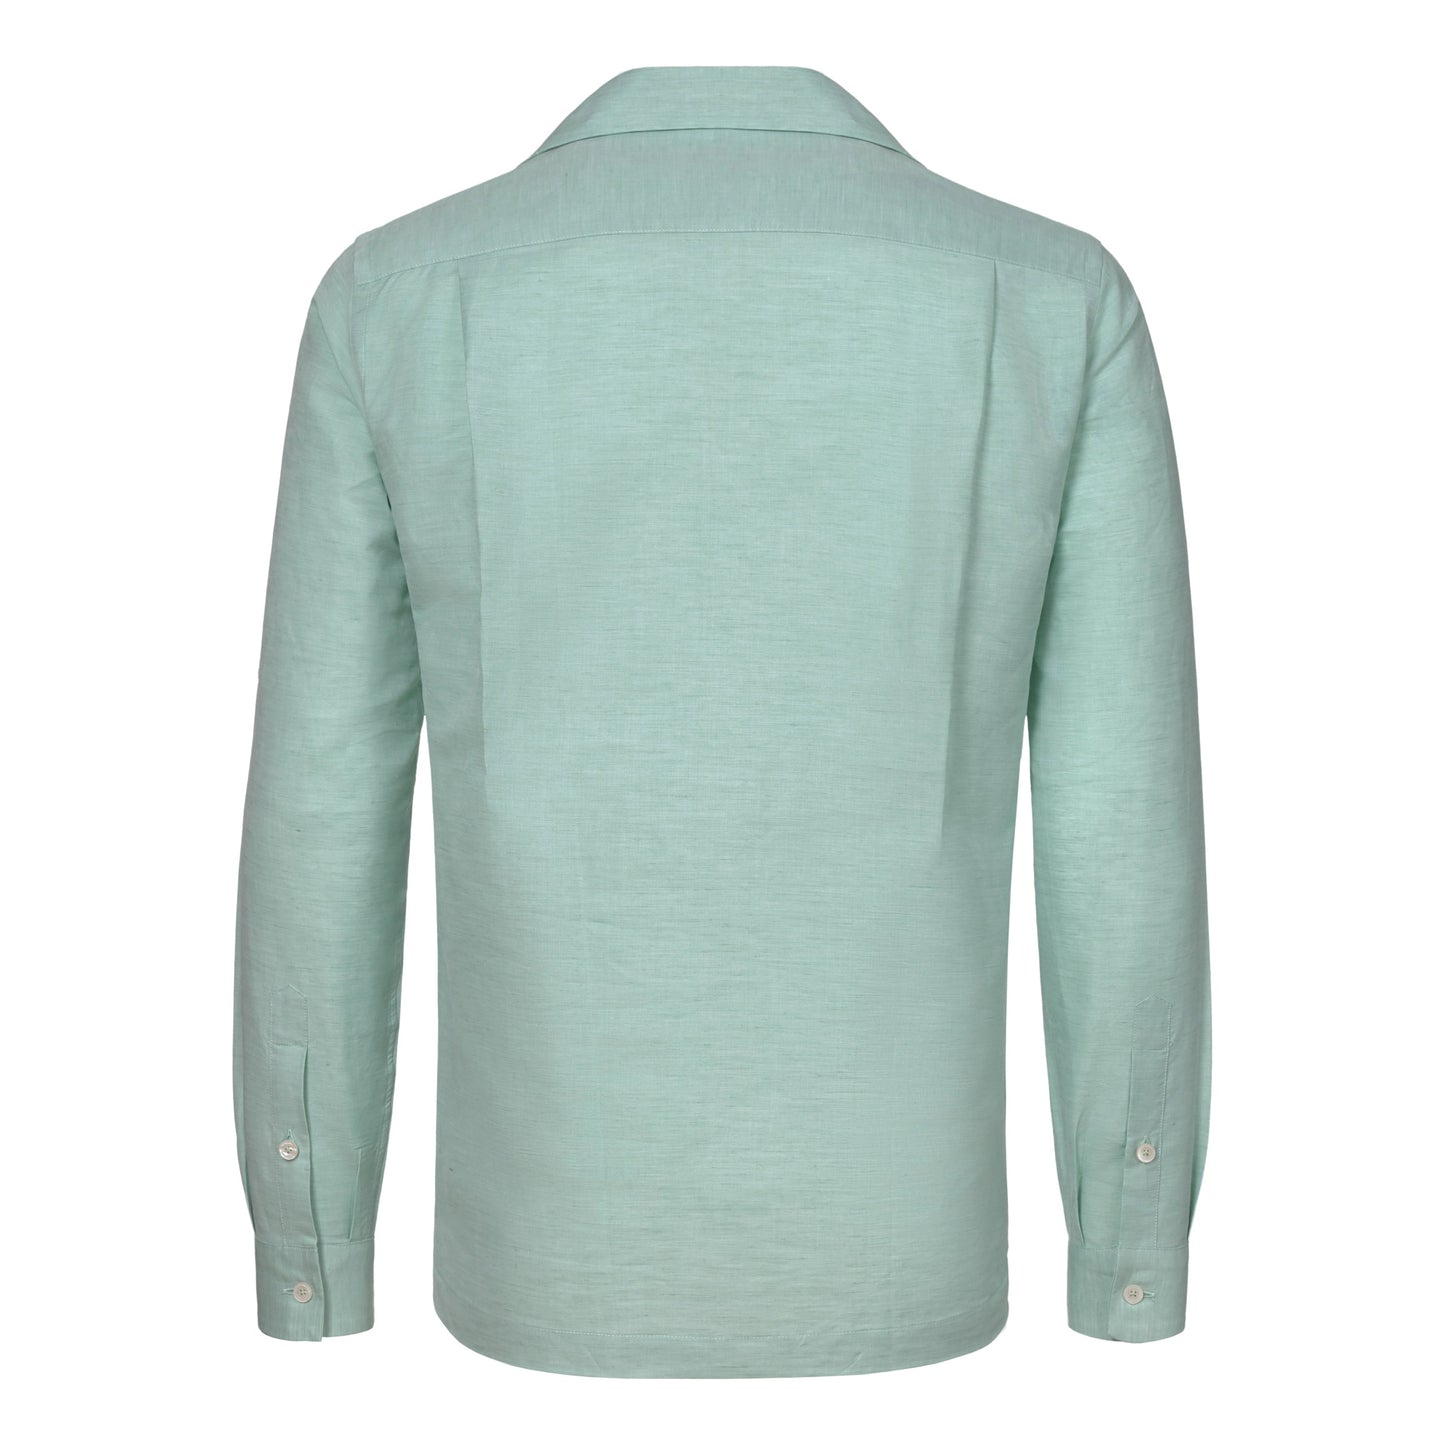 Sease Linen - Cotton Blend Polo Shirt in Crystal Water - SARTALE